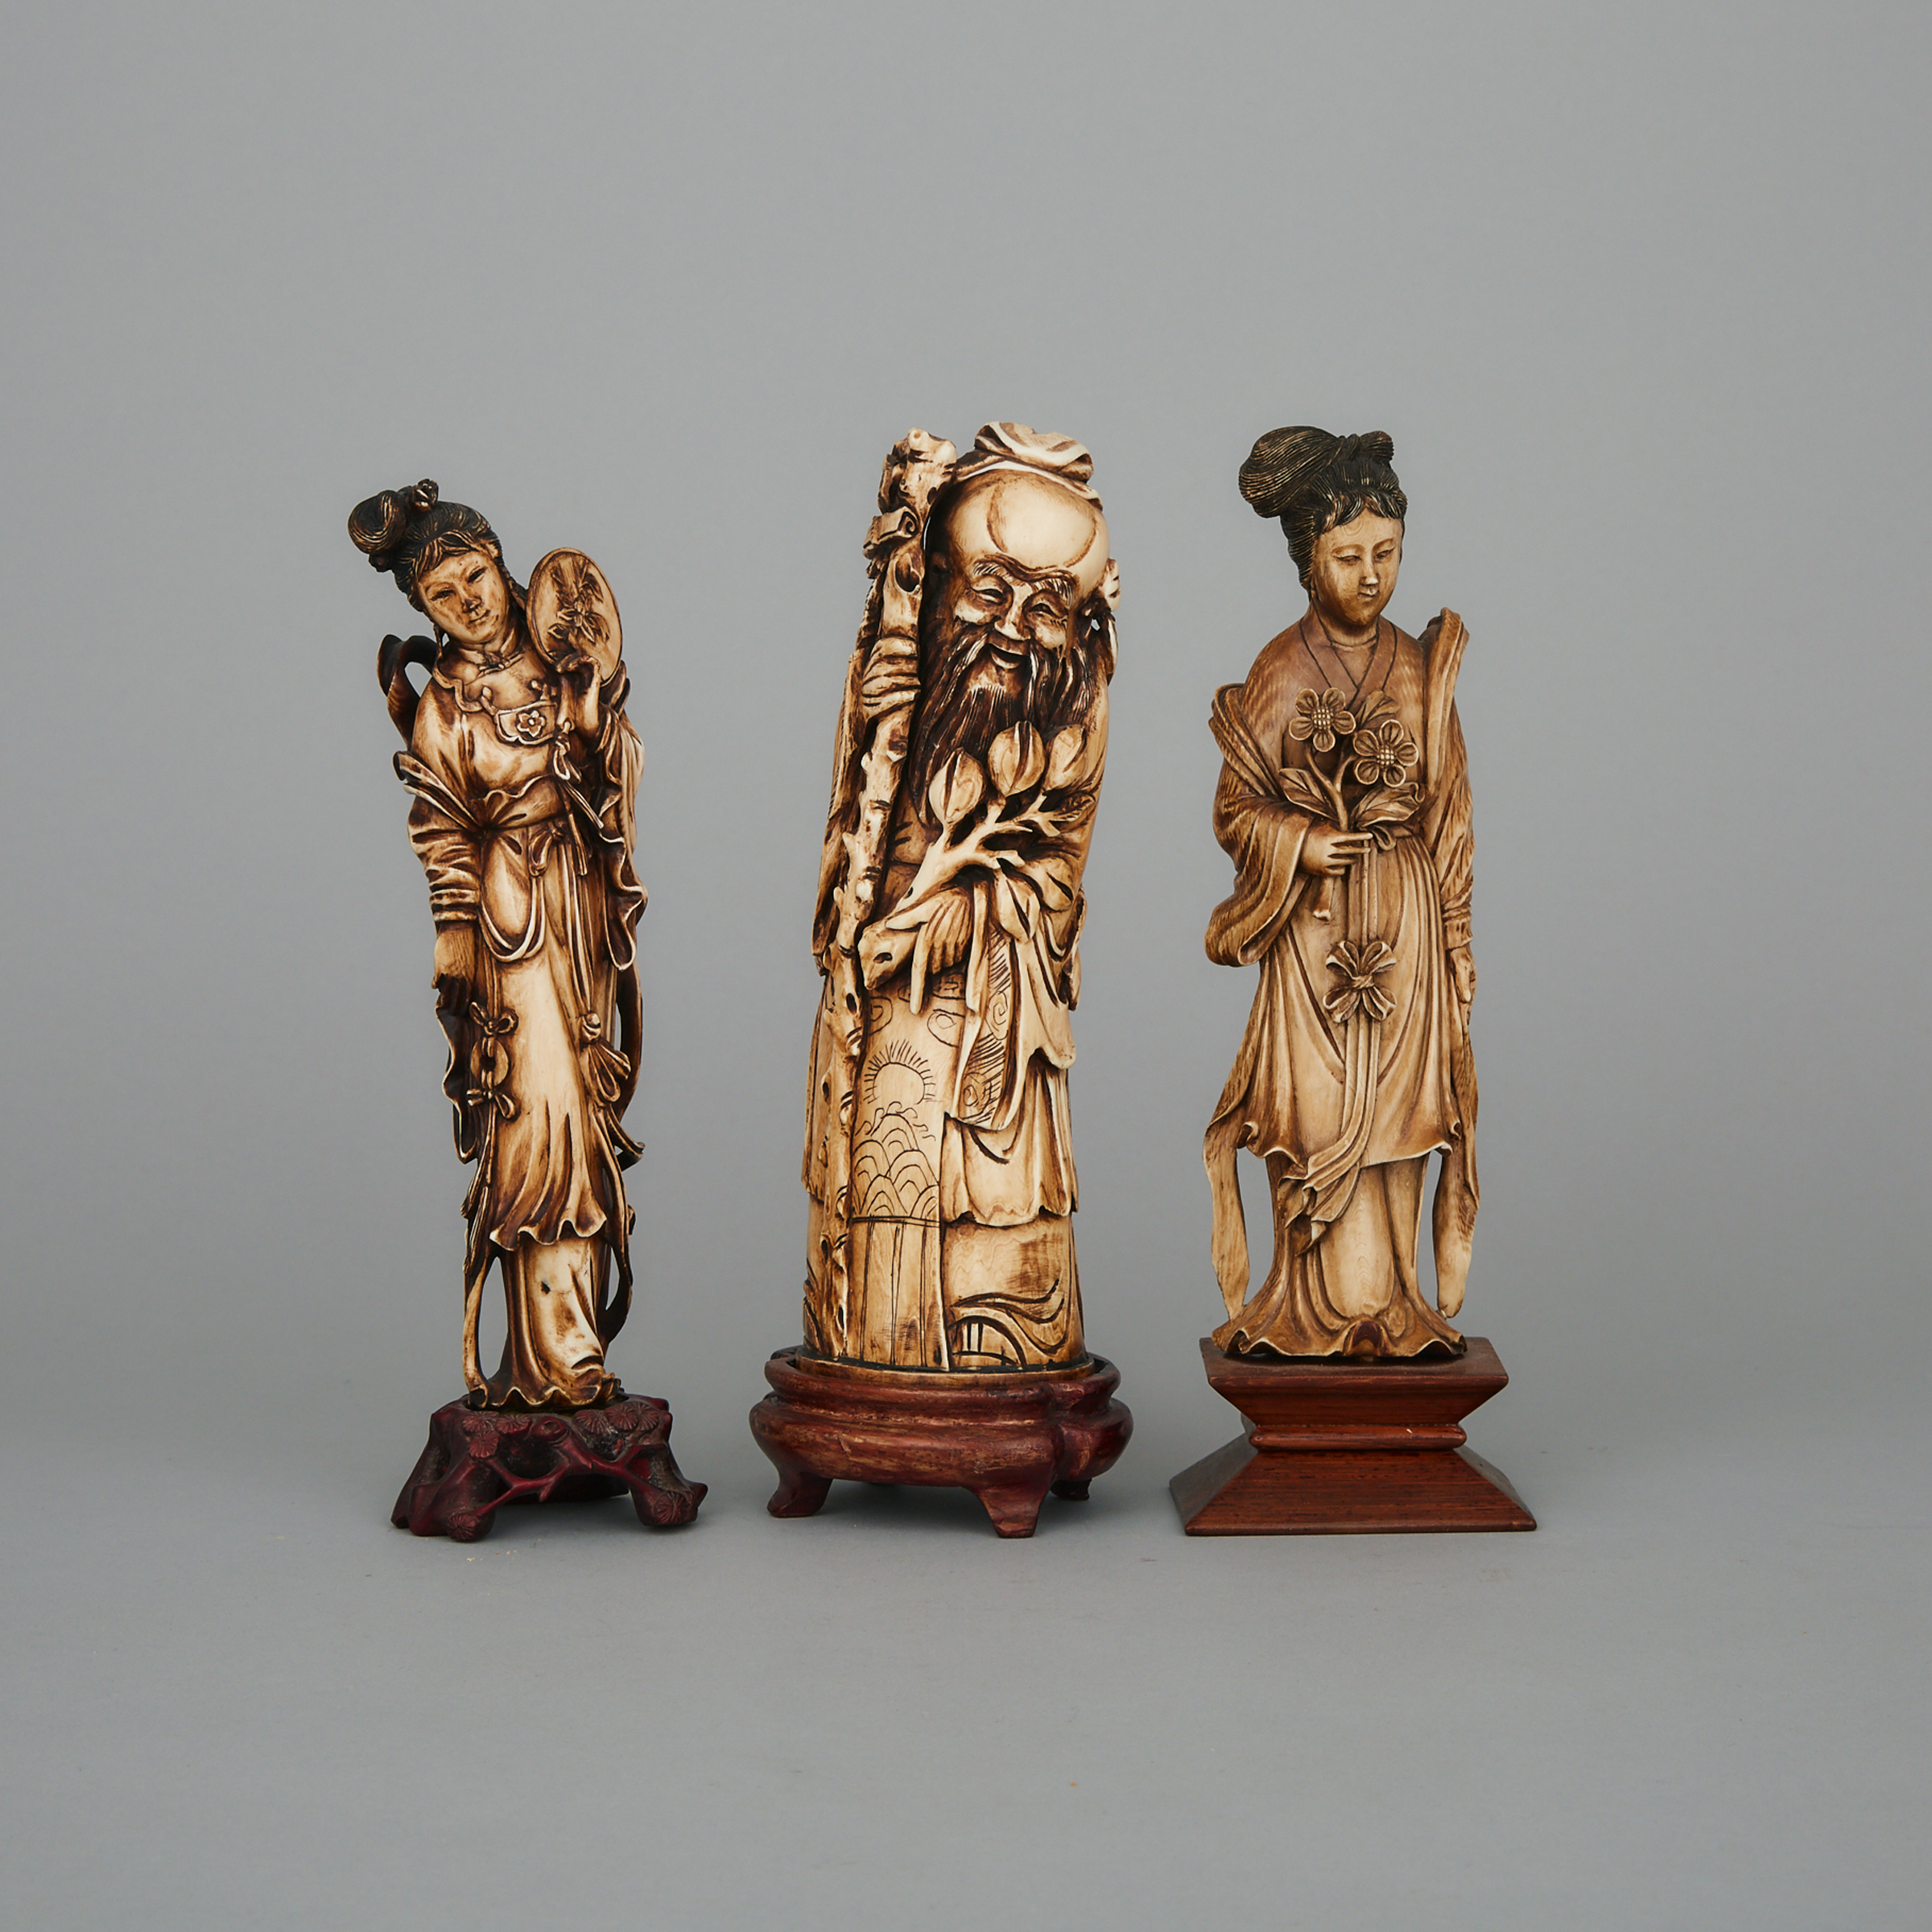 A Group of Three Ivory Standing Figures